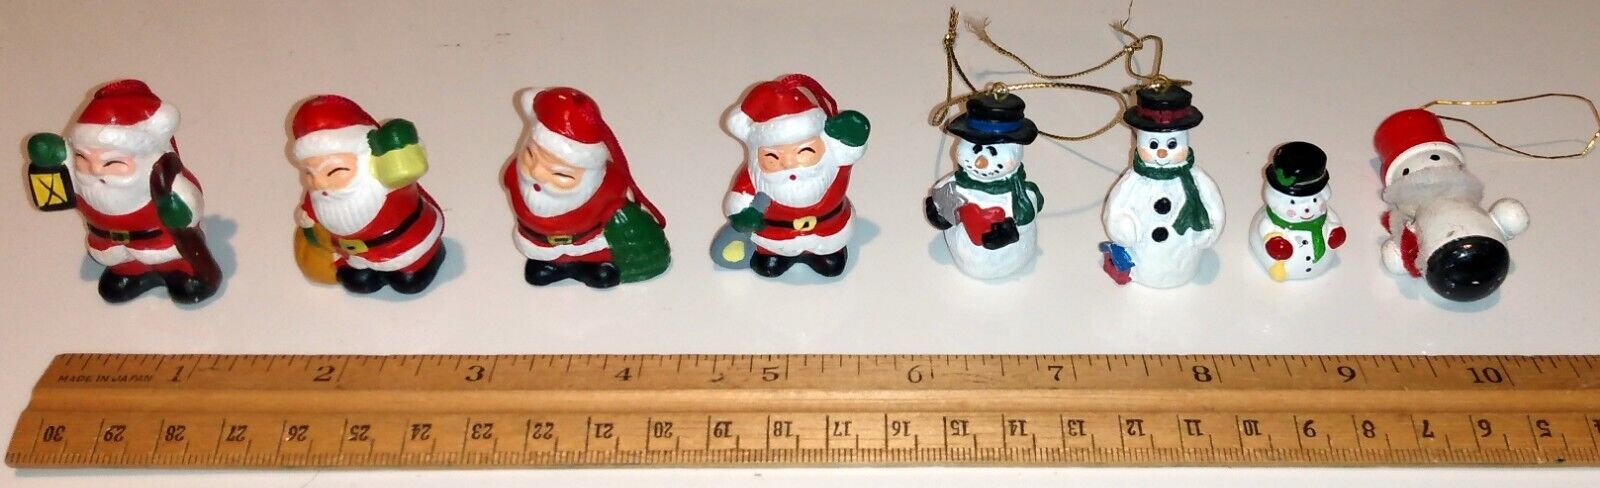 EIGHT SMALL SANTA AND SNOWMAN ORNAMENTS OR FIGURINES, RESIN/WOOD, PRE-OWNED